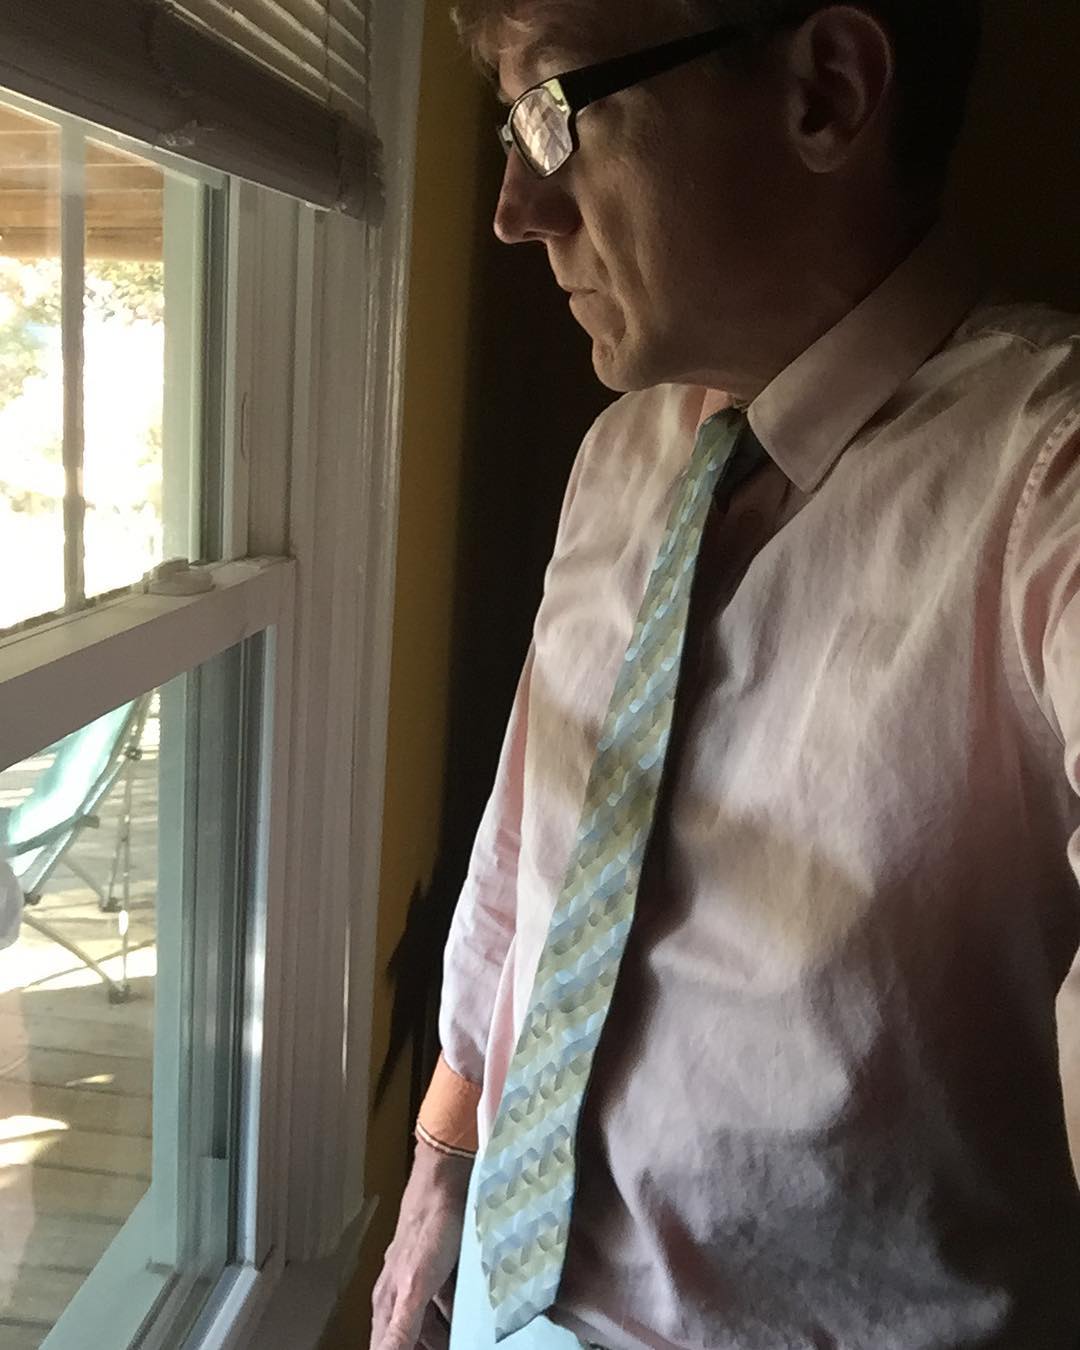 #pastels and working from home kinda #tiedayfriday #ftw #nofilter